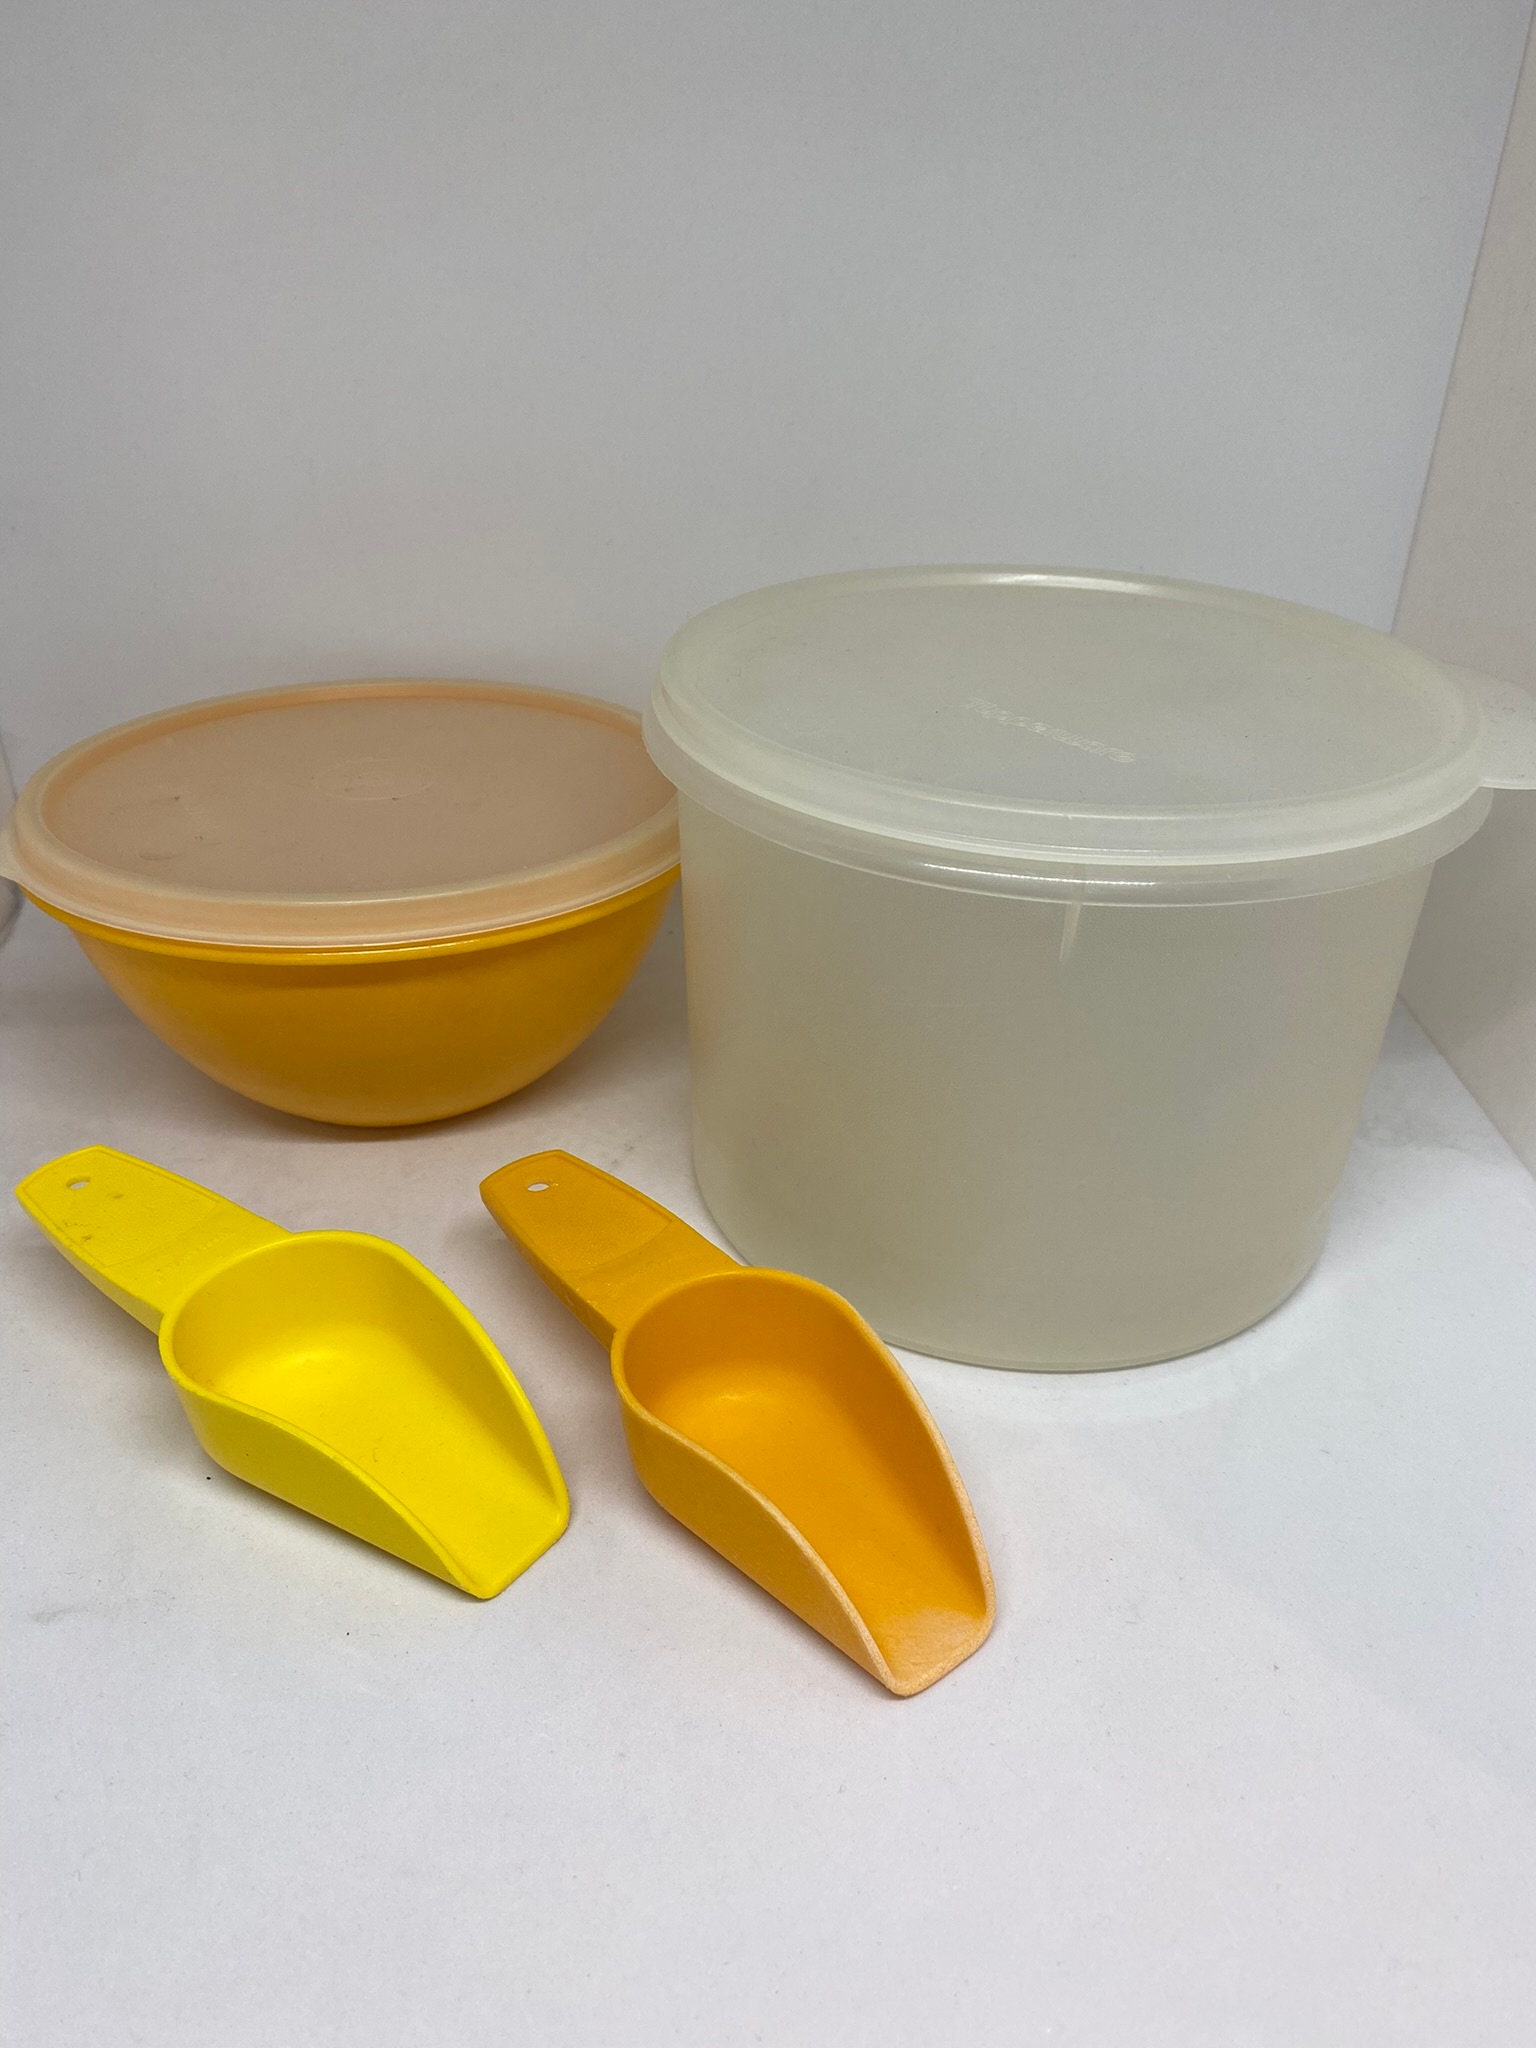  Tupperware Canister Scoops Rocker Style Scoops Set of 5  Creamsicle Orange: Home & Kitchen